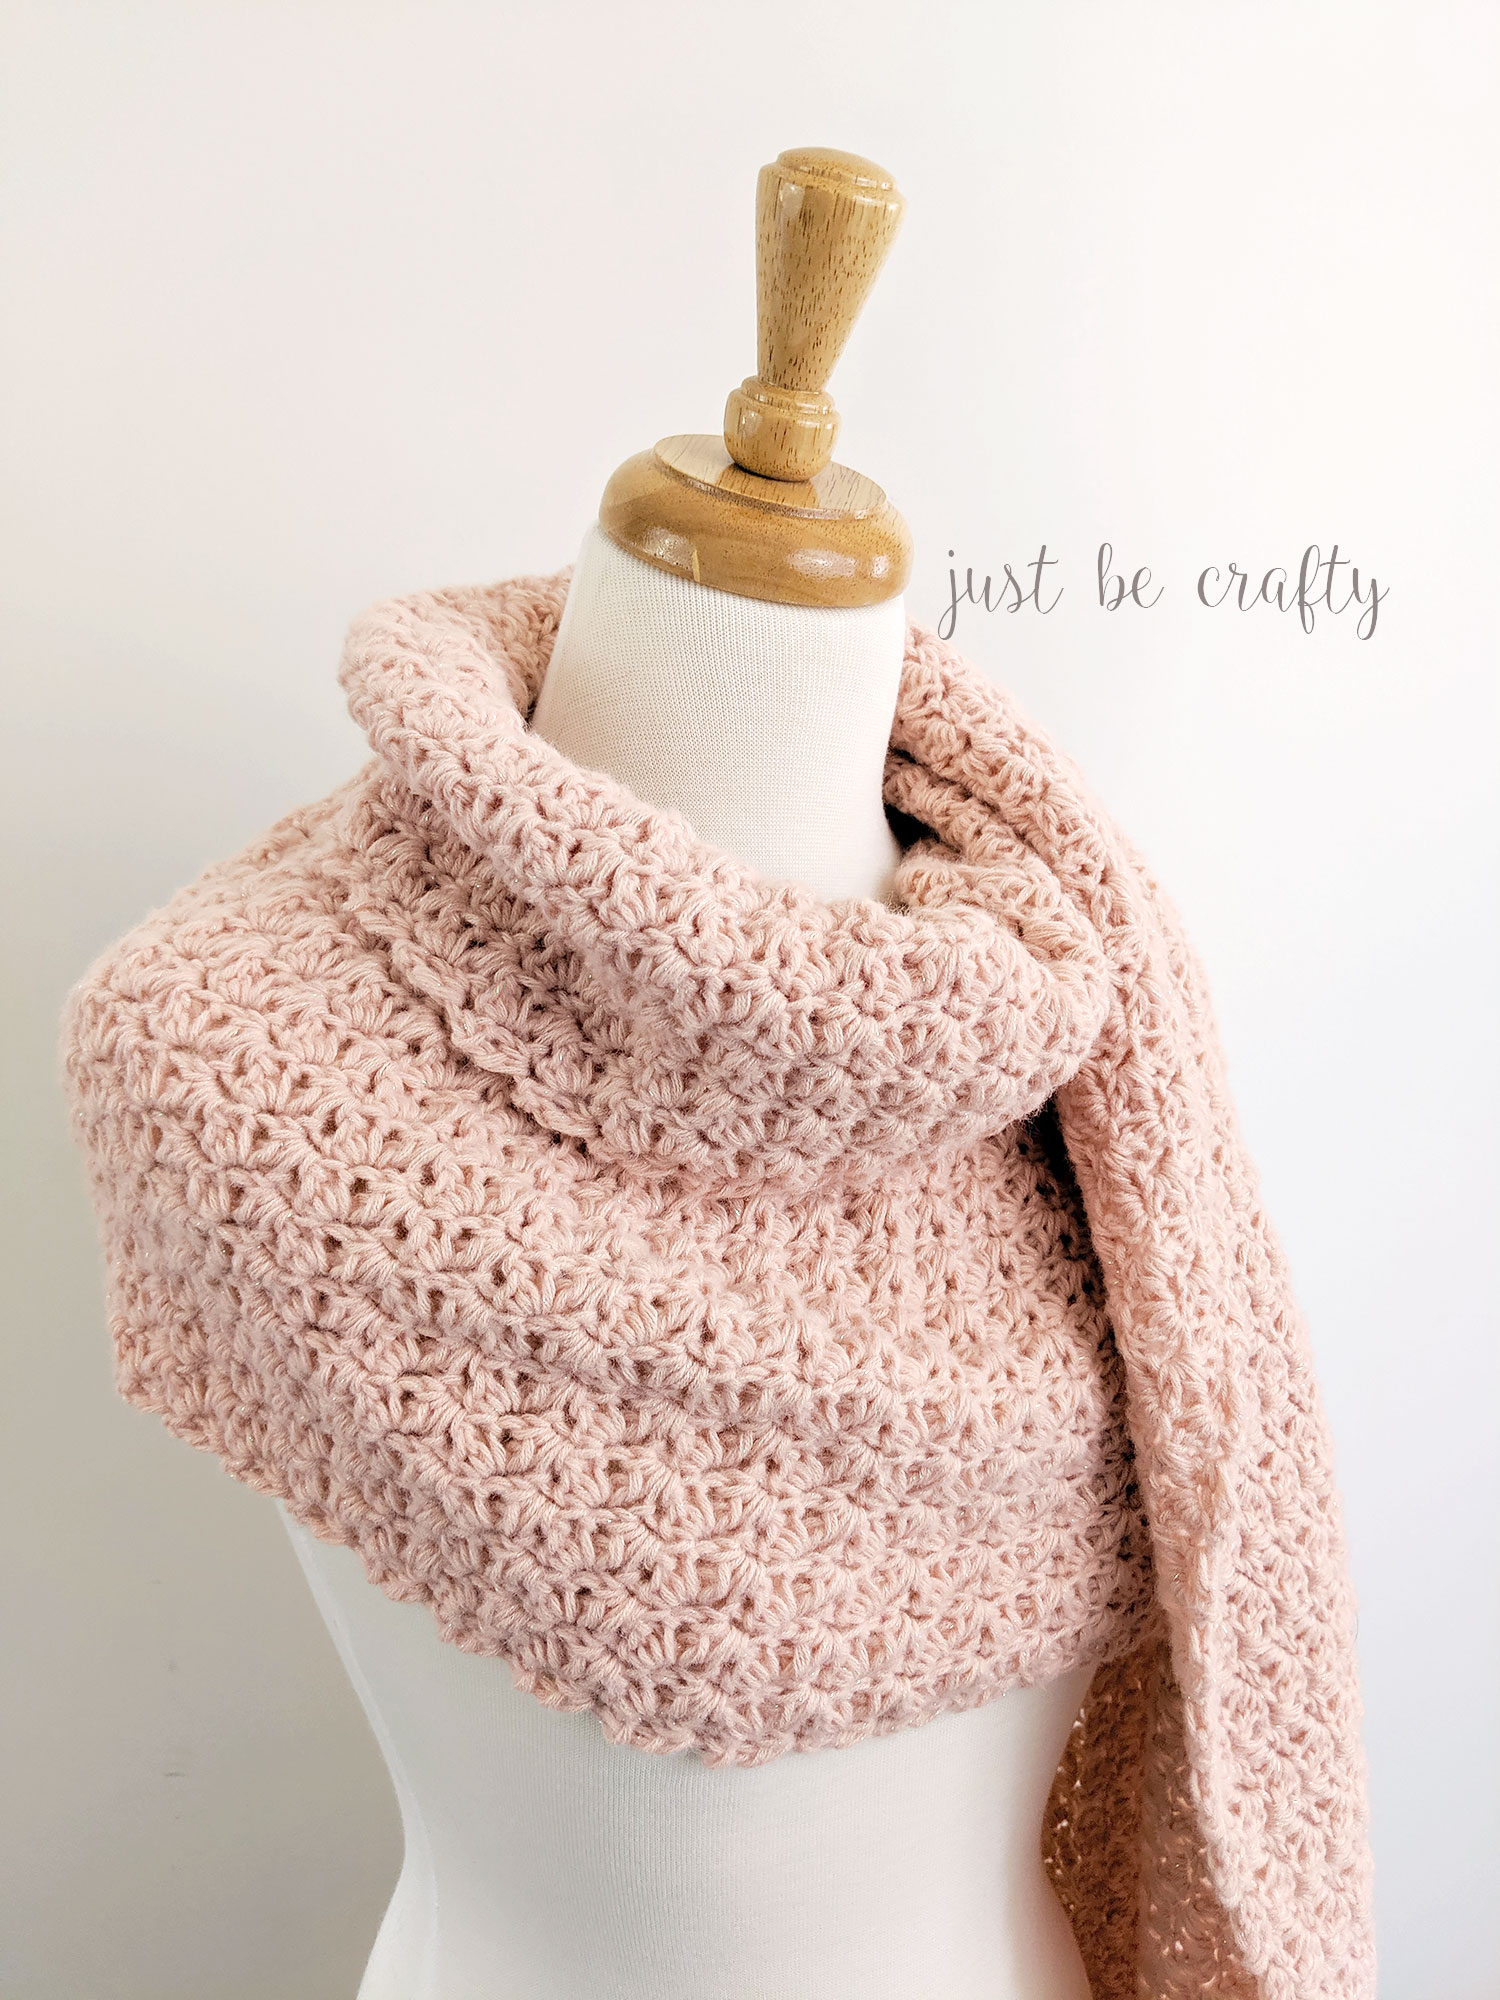 Shimmer Crochet Scarf - Free Pattern by Just Be Crafty